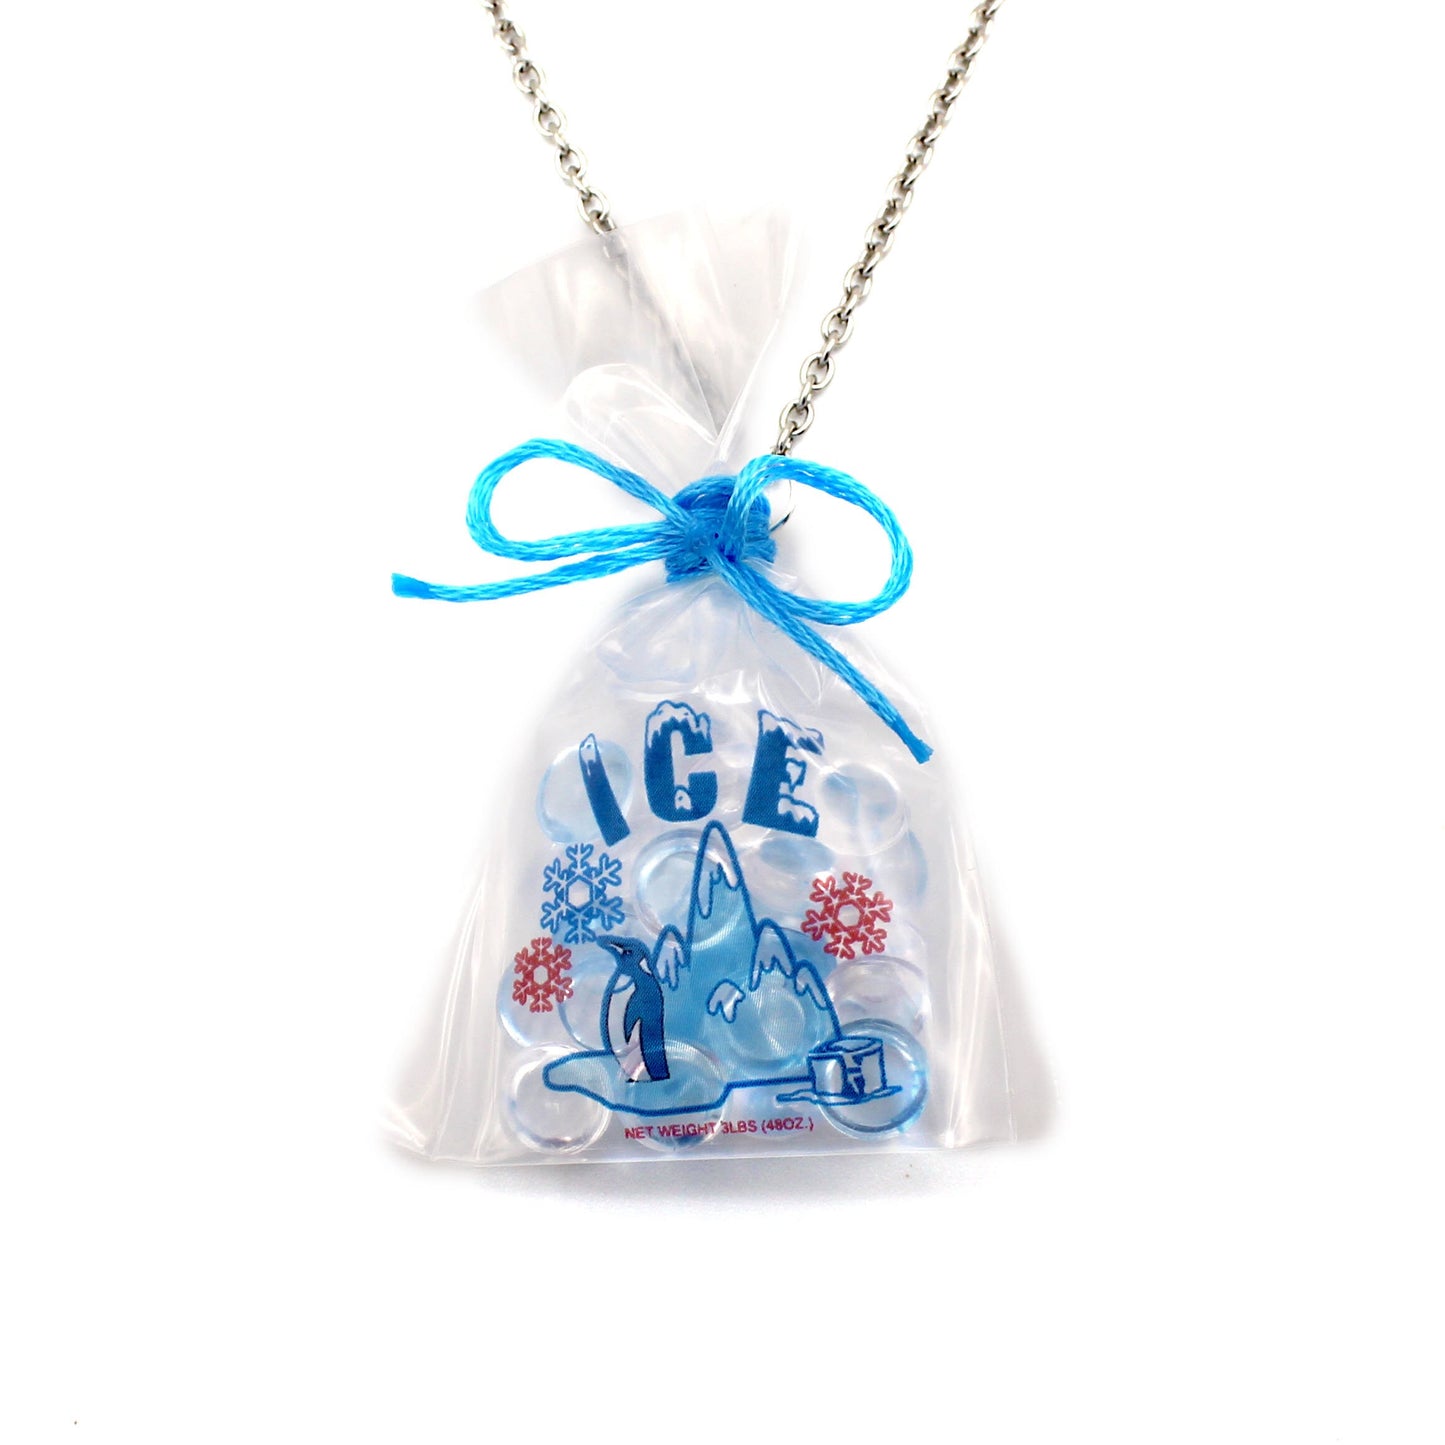 Penguin Ice Bag Necklace, 18" Stainless Steel Chain Necklace - Fatally Feminine Designs